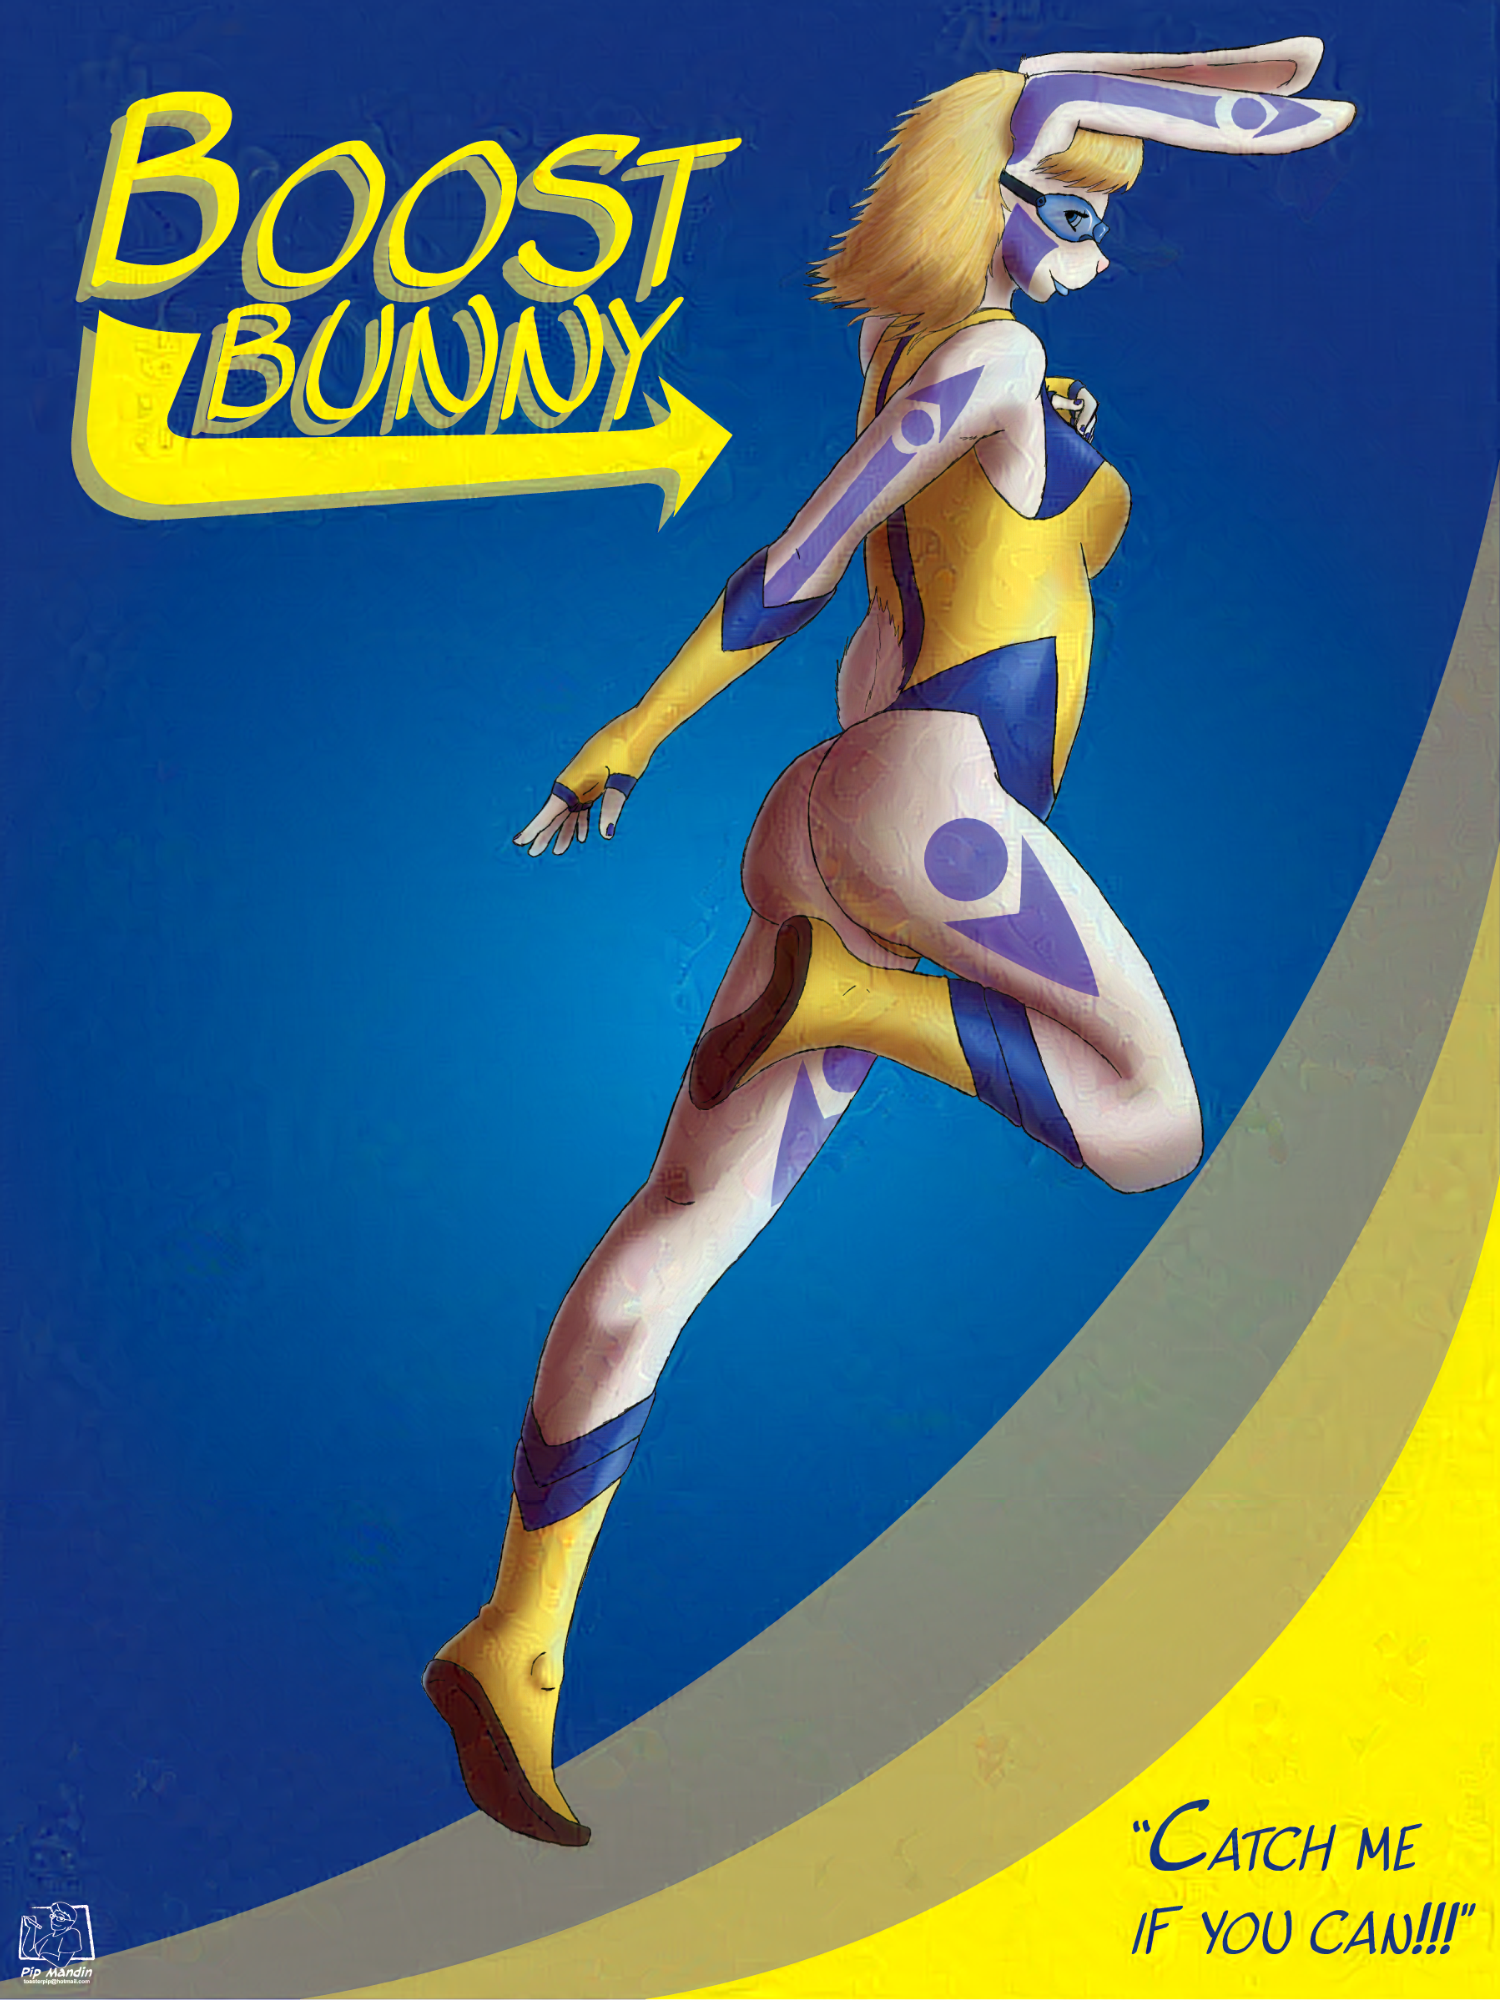 A pinup-style poster featuring a superhero character named "Boost Bunny". She is a snowshoe hare anthro woman with a slender, athletic figure. She is posed with one leg drawn up and one arm back, as though leaping or taking an exaggerated running stride. She looks over her shoulder at the viewer with a coy smile. Her costume is a yellow and blue leotard, gloves, and boots, and blue tinted goggles. The poster is captioned with her name underlined by a swooshing arrow, and the phrase "Catch Me If You Can!"